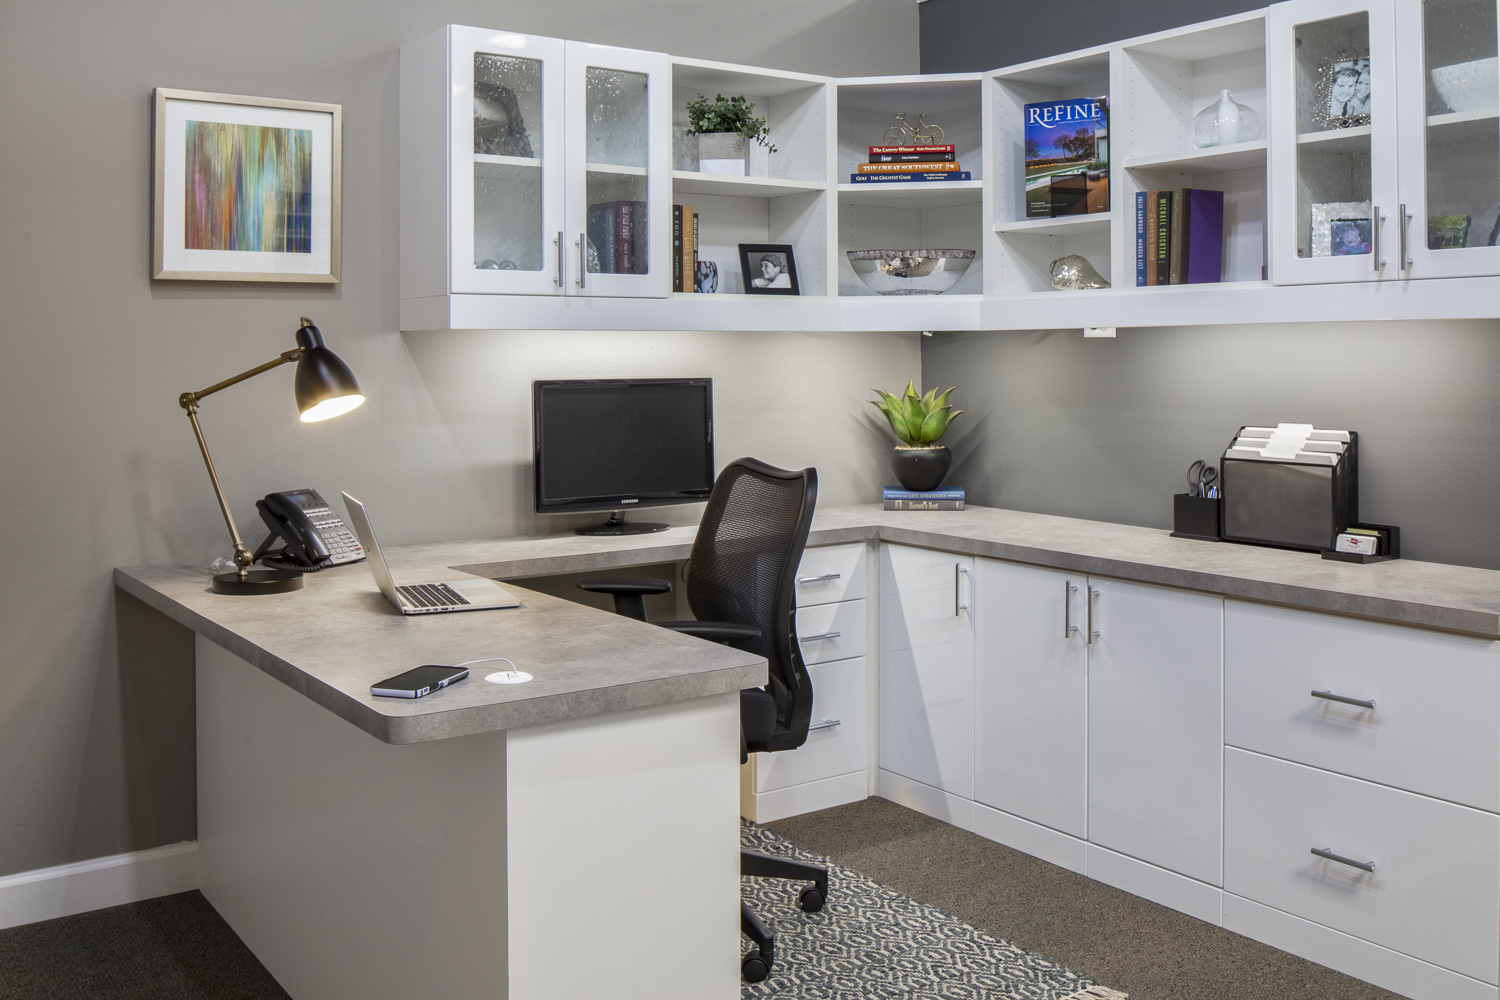 Our custom home office cabinetry is designed around the way you work. Transform a spare bedroom into a stylish and functional custom home office when you work from home.